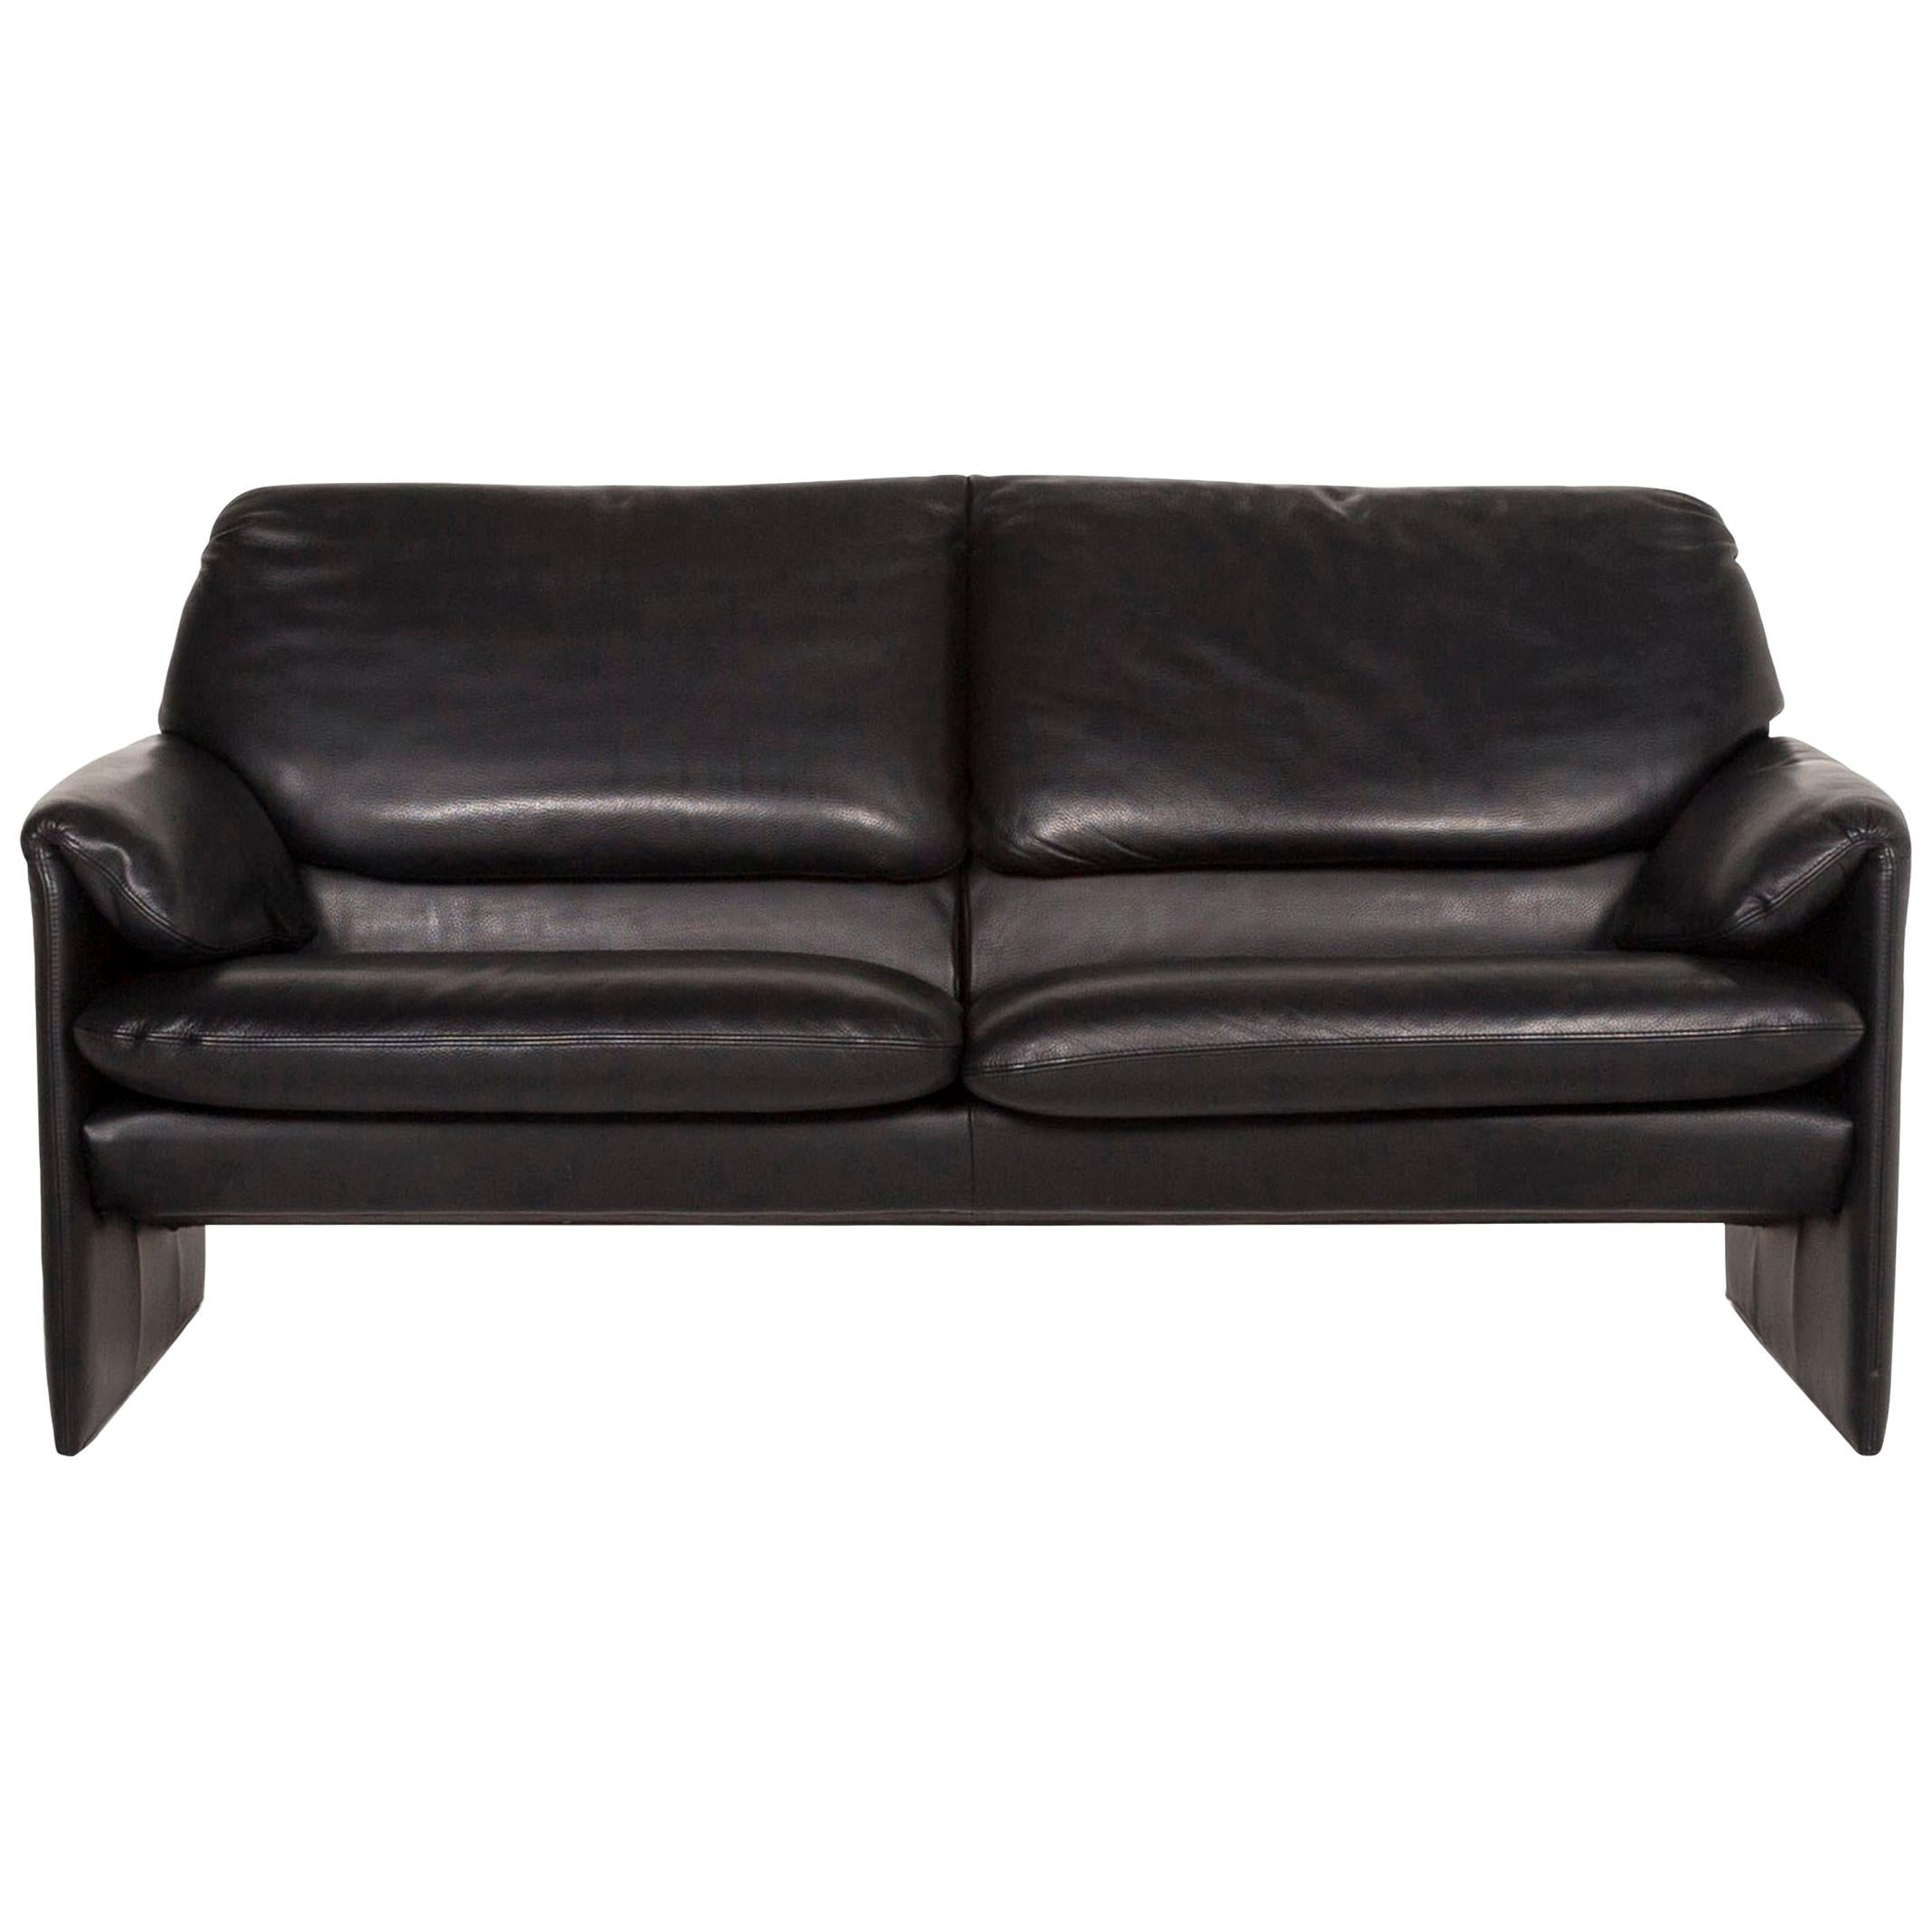 Leolux Leather Sofa Black Two-Seat Couch For Sale